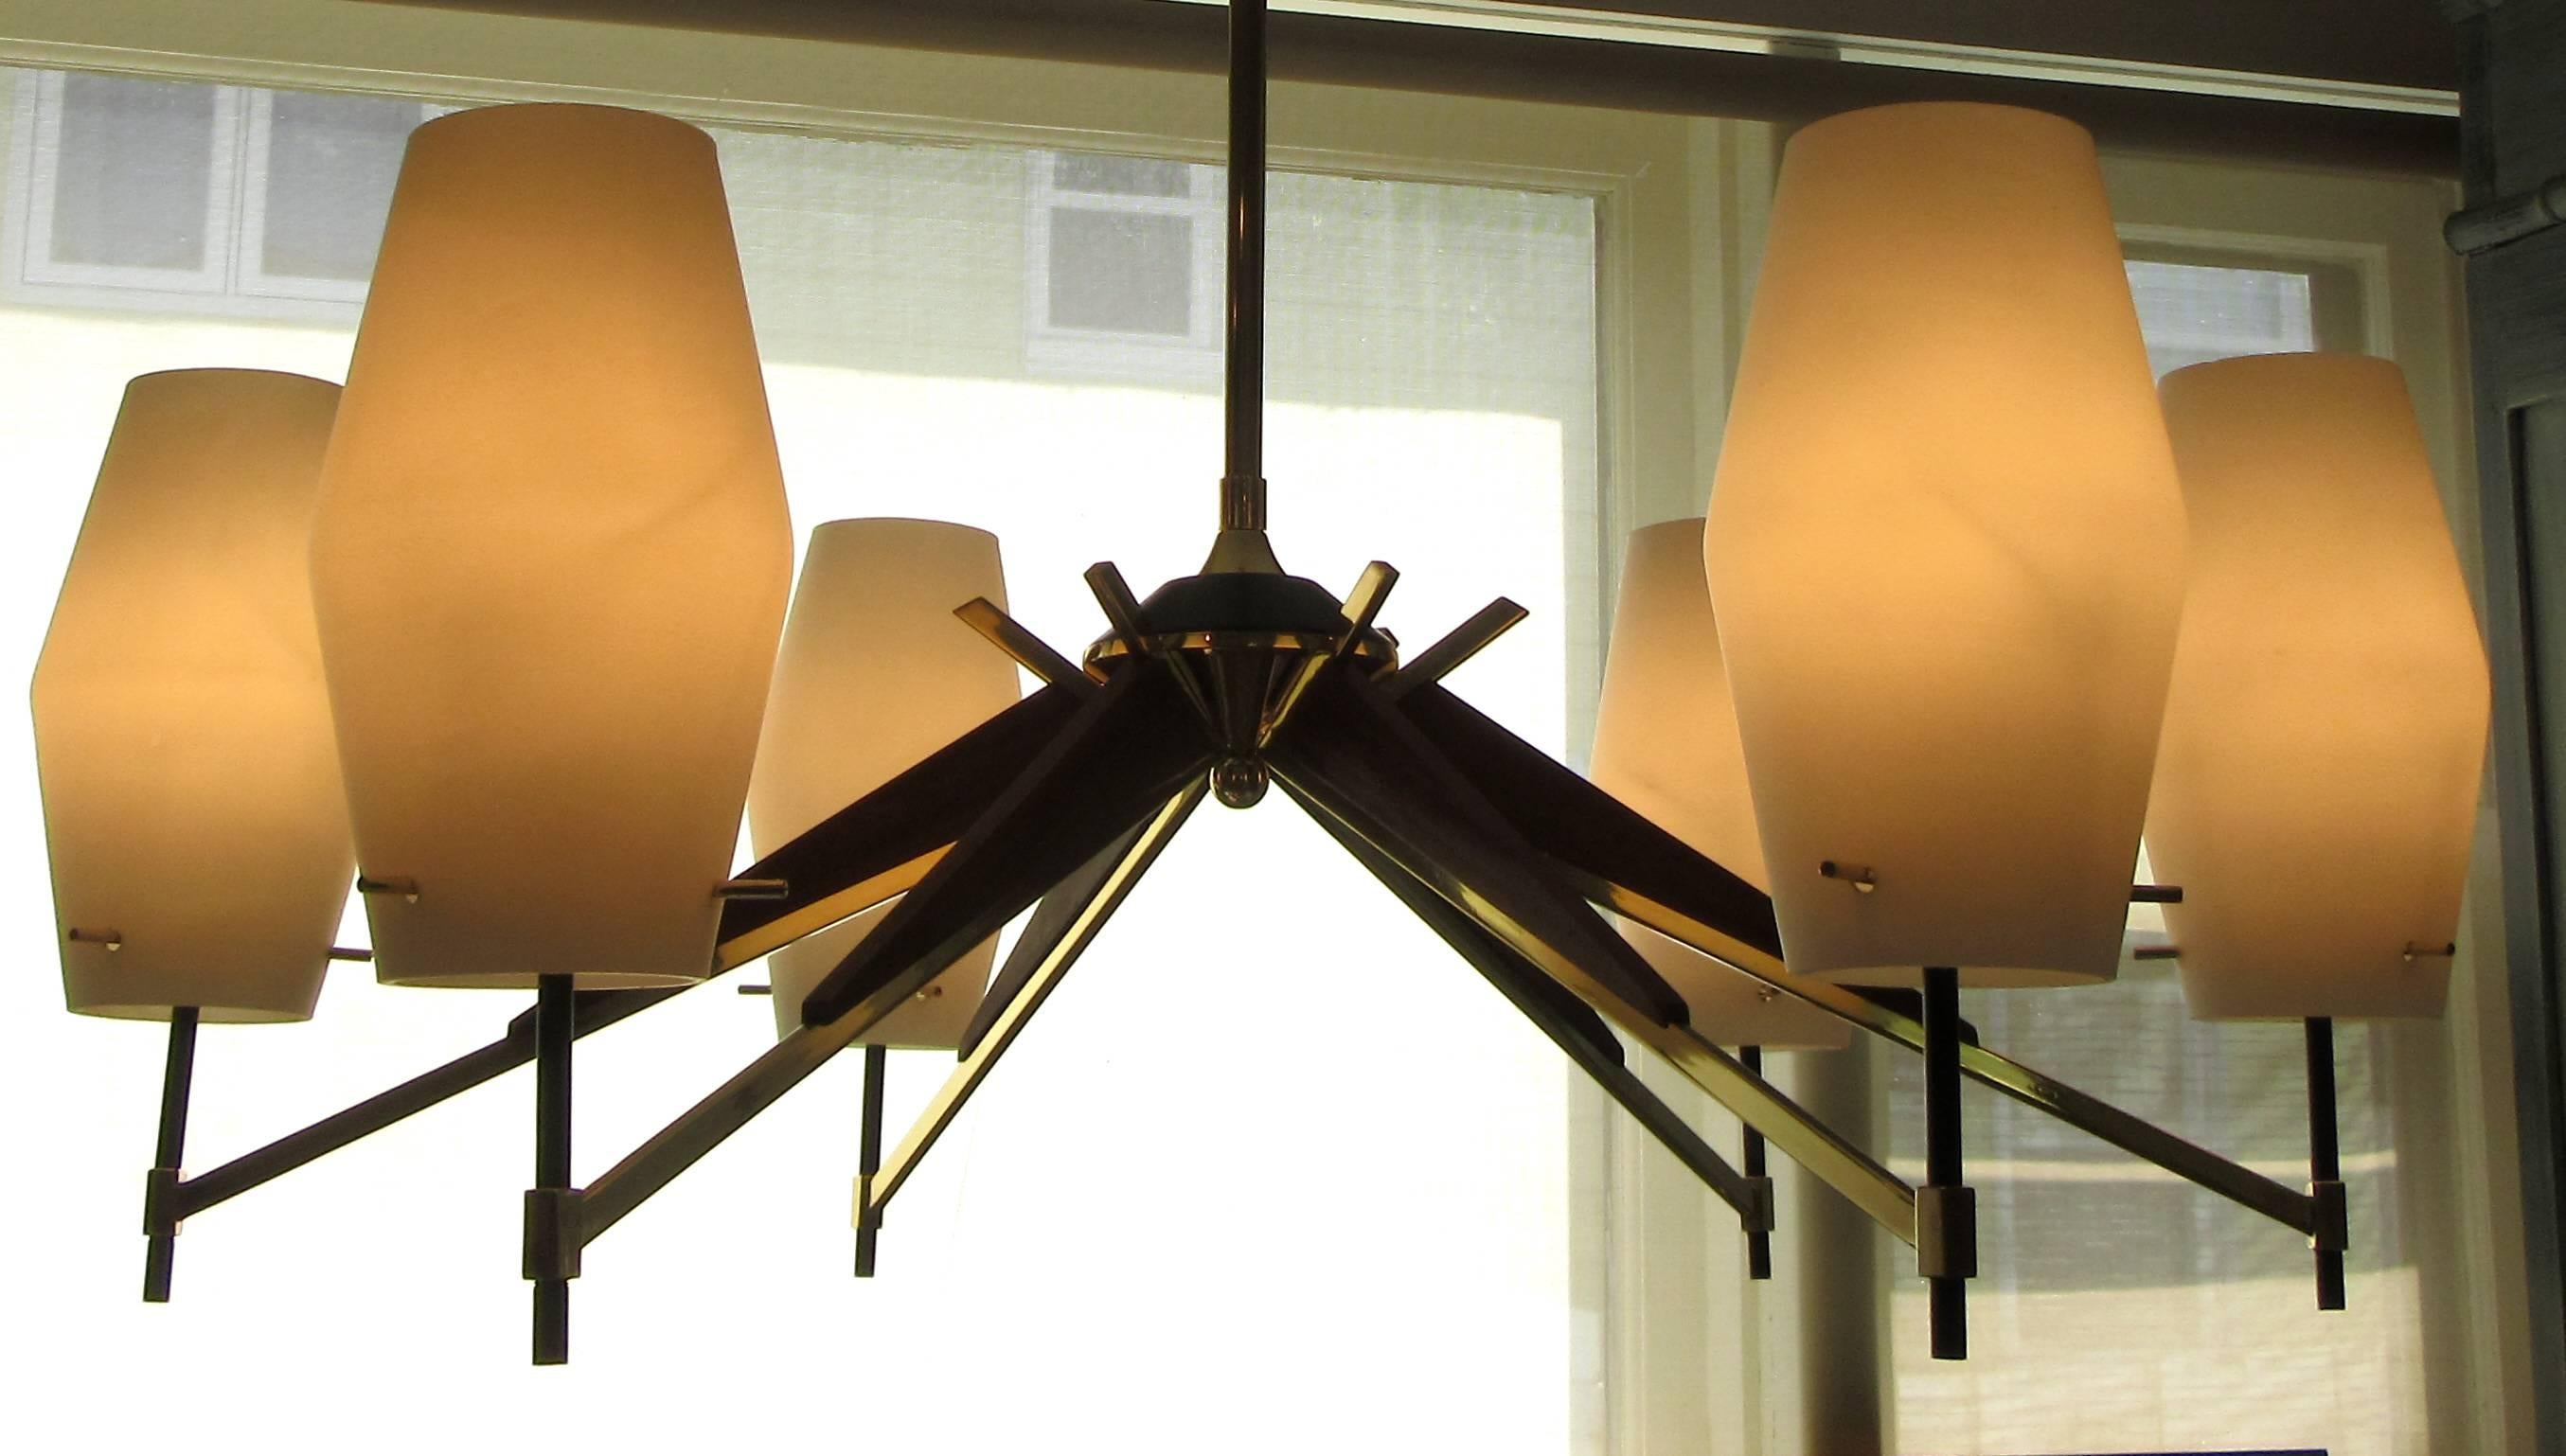 A large six-light Danish modern chandelier. Six arms of walnut and brass terminate with an opaque white glass cylinder form shade. The chandelier hangs from a brass rod. The sockets hold candelabra size bulbs. Pictured when lit is with 25 watt bulbs